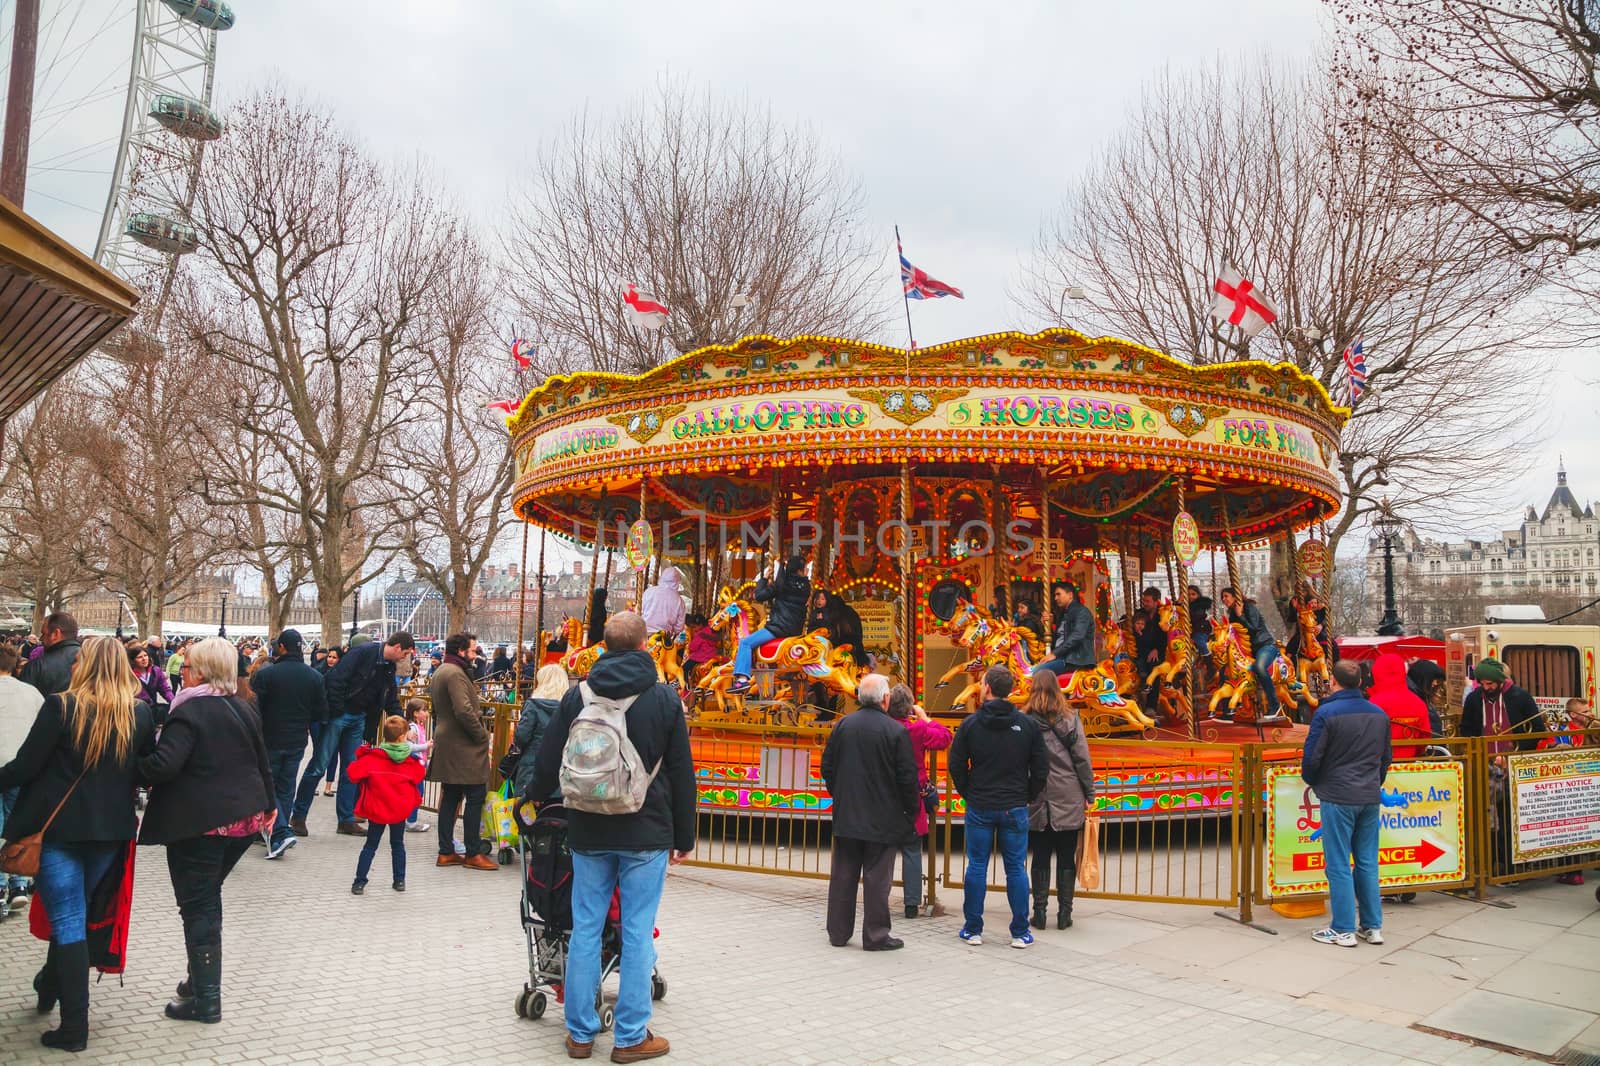 Carousel at the Thames riverbank in London by AndreyKr